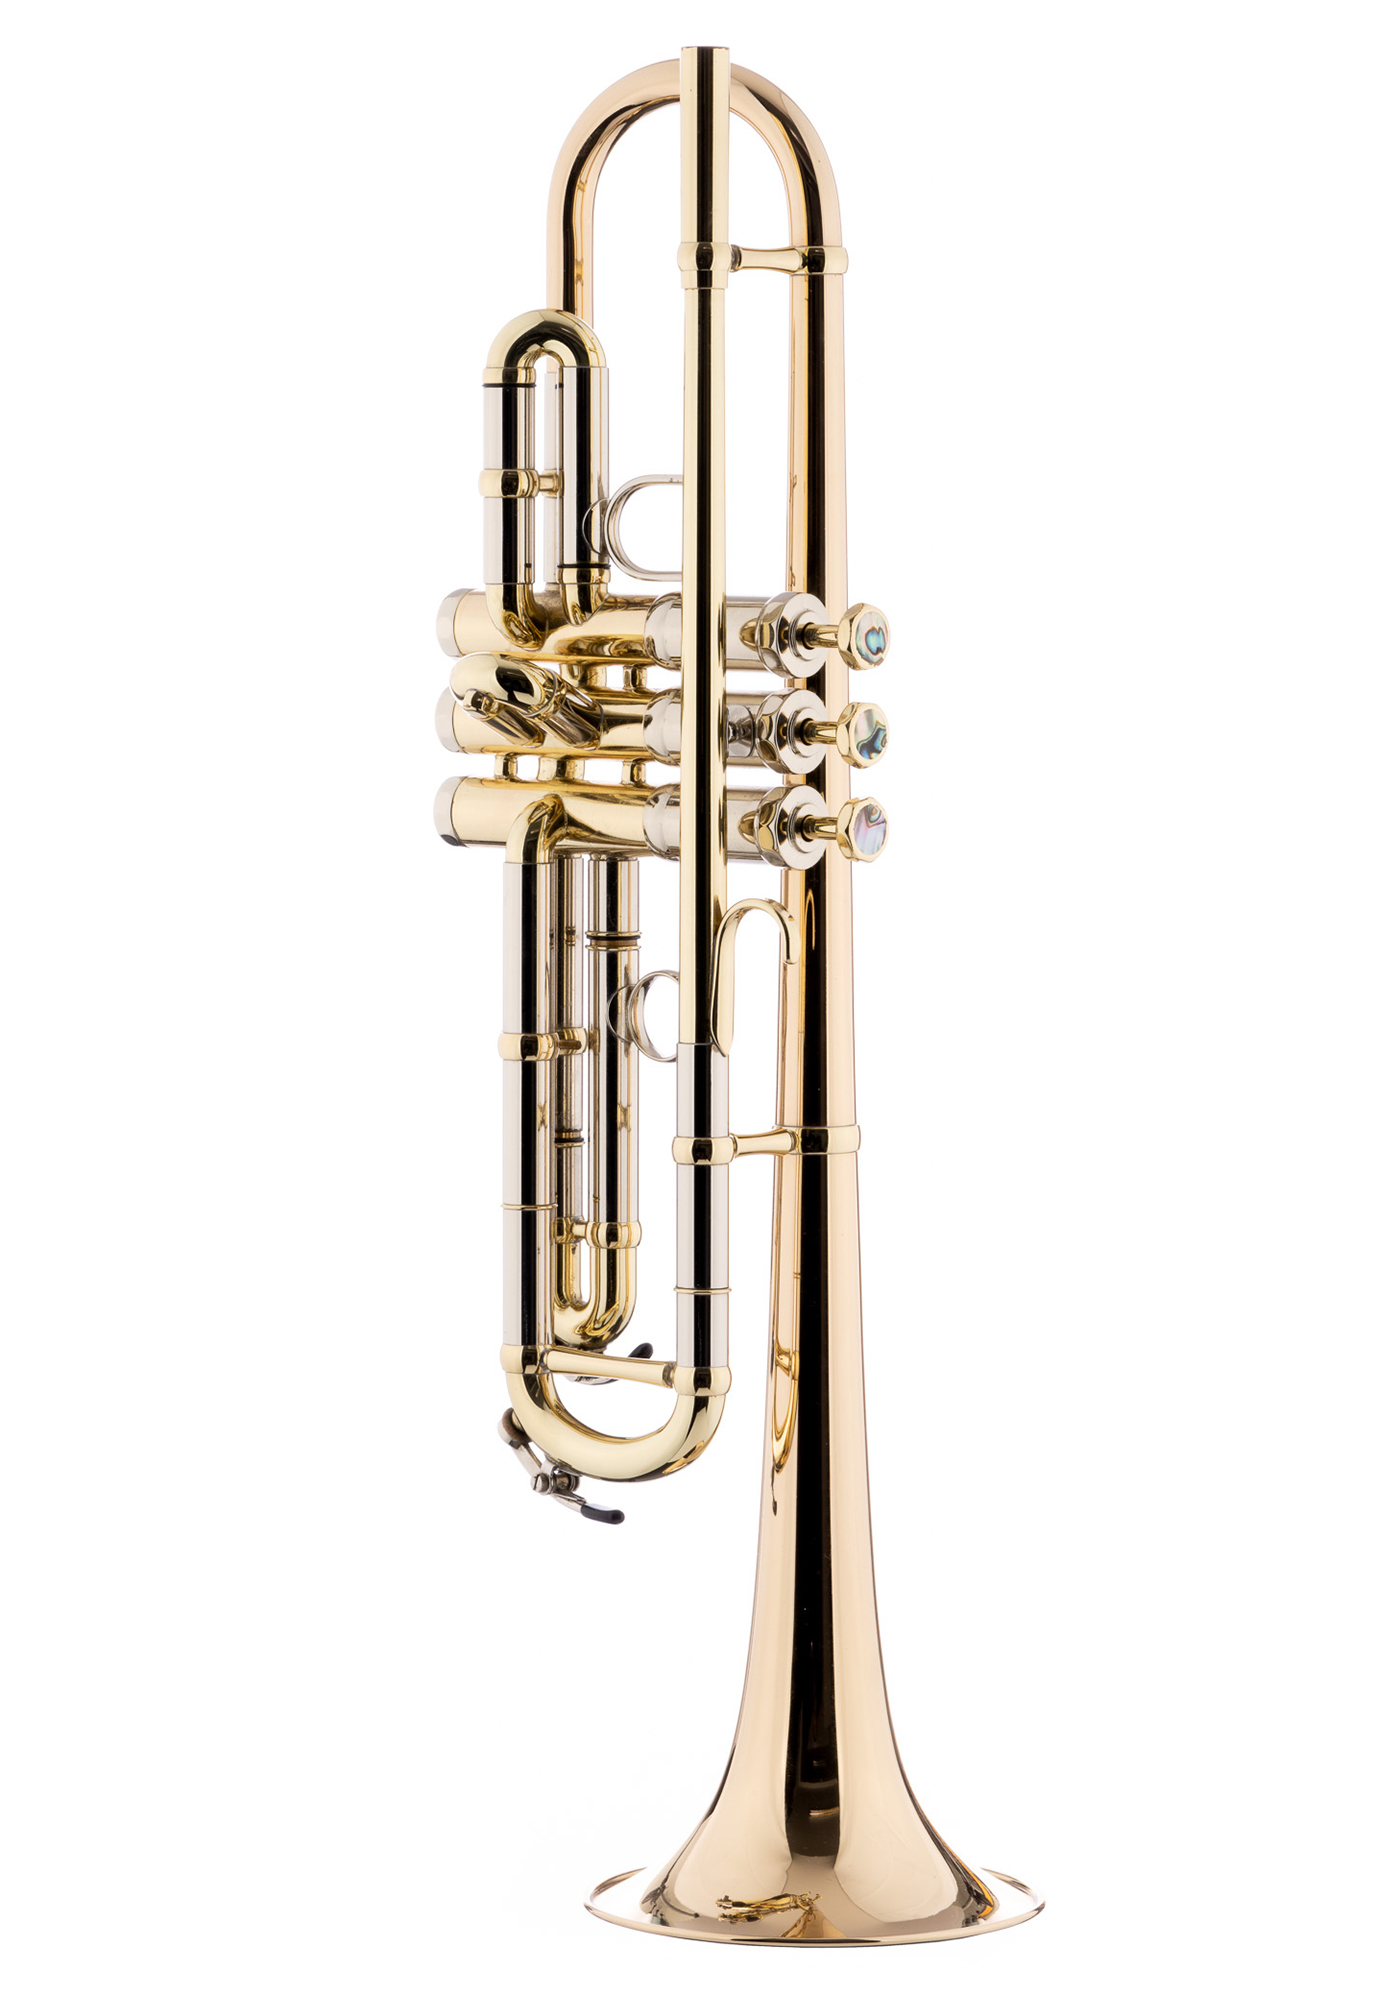 Schagerl Bb-Trumpet "PENELOPE" lacquered